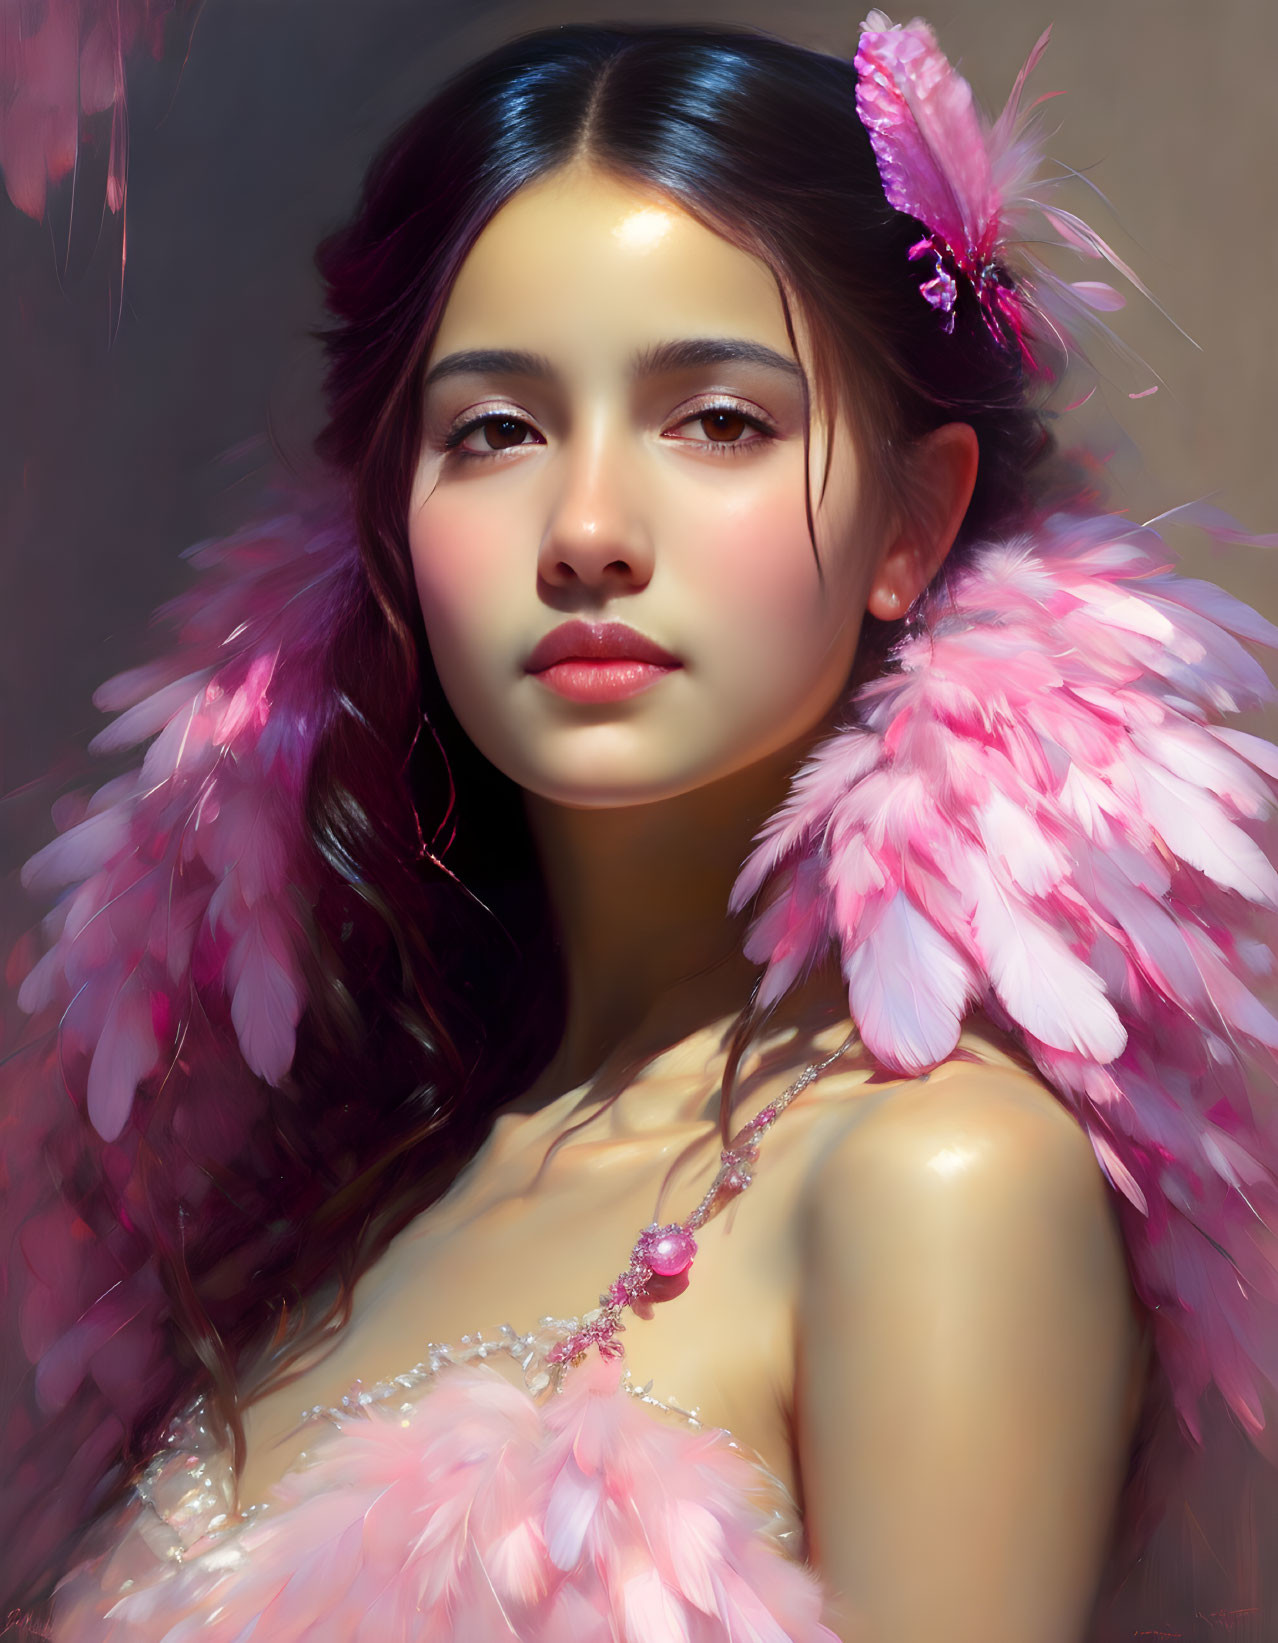 Girl in pink feathers